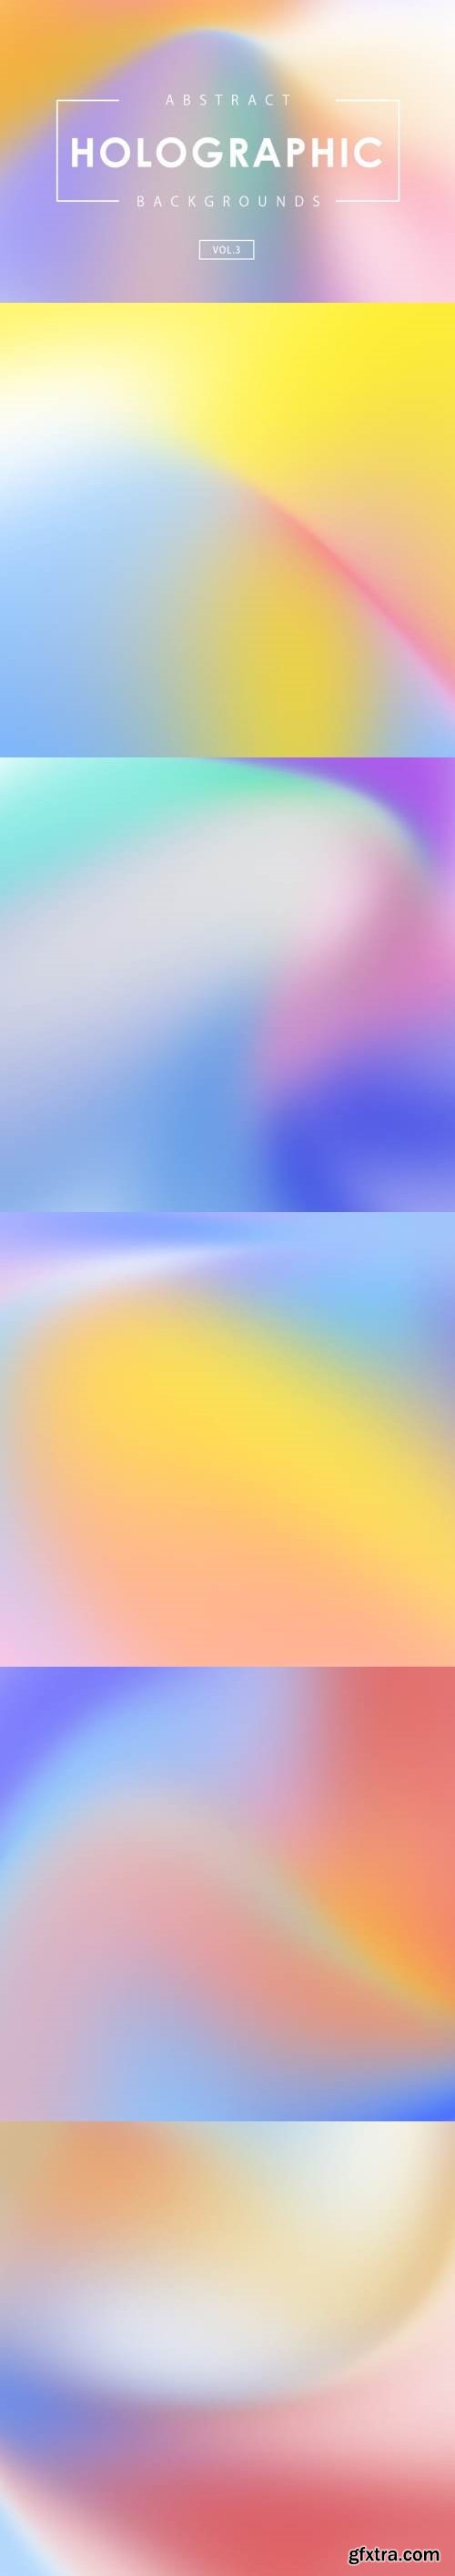 Abstract Holographic Backgrounds Bundle